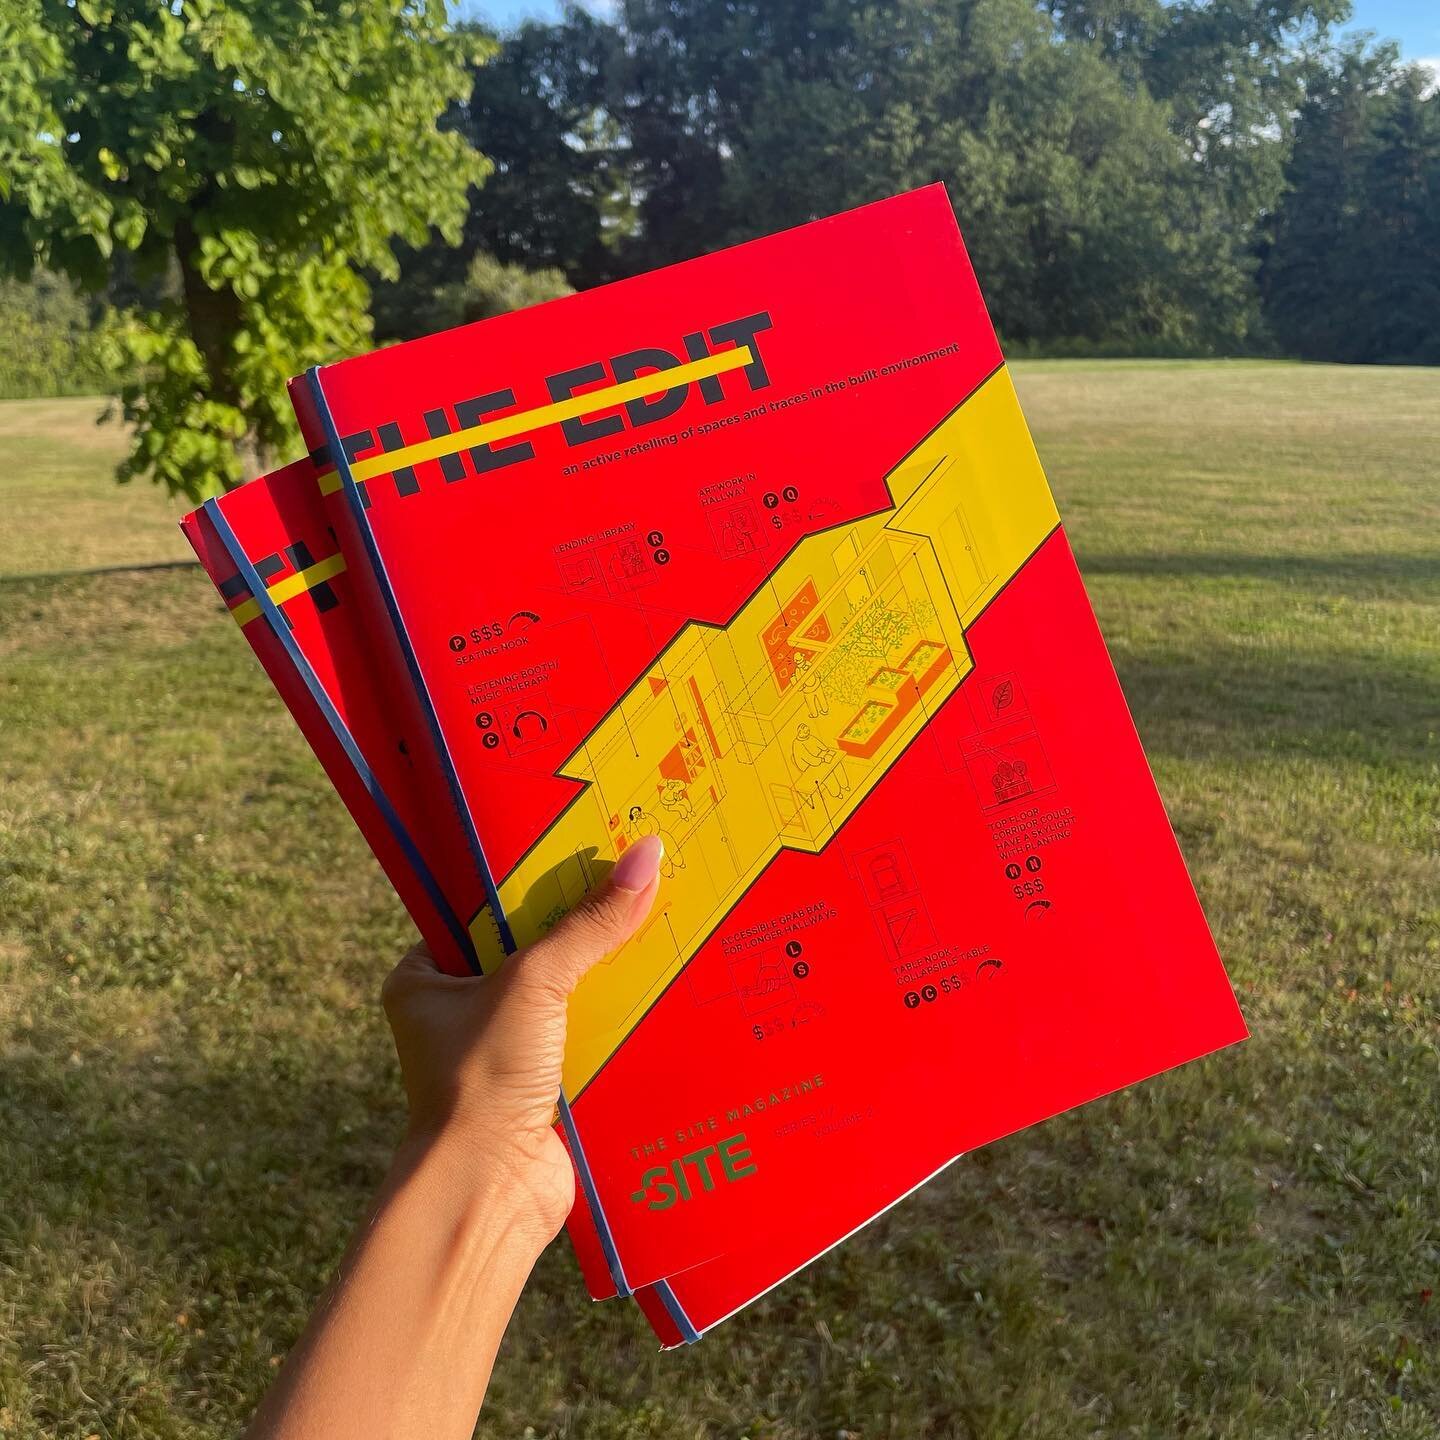 Add this to your summer reading list! ☀️ THE EDIT is for design thinkers everywhere. This issue packs a punch with ghost manifestos, soil stories, interactive questionnaires and more. Check out our bio link to get your copy!